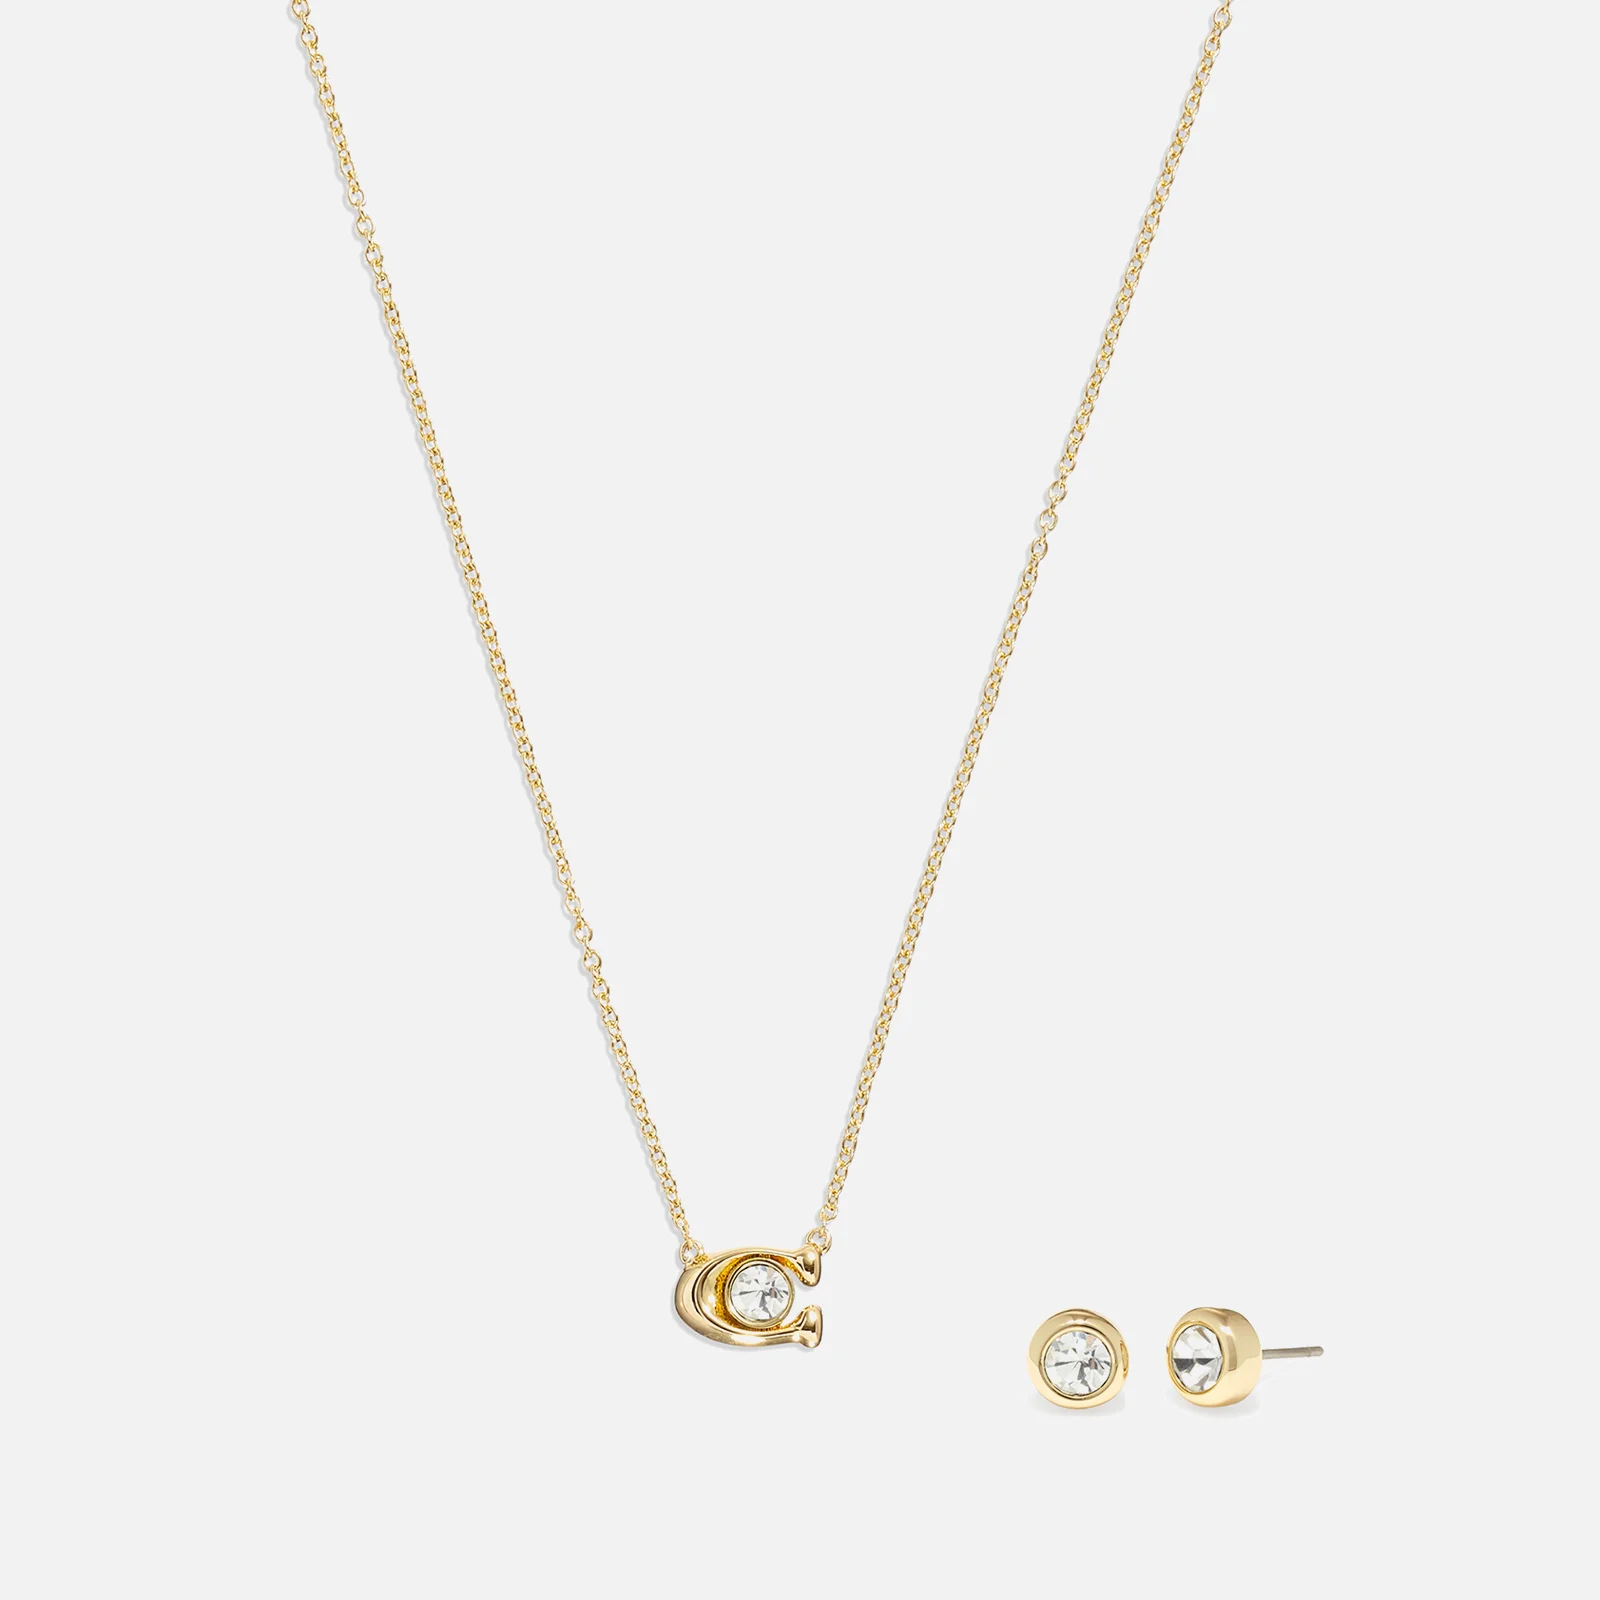 Coach Signature Gold-Tone Necklace and Earrings Set Image 1